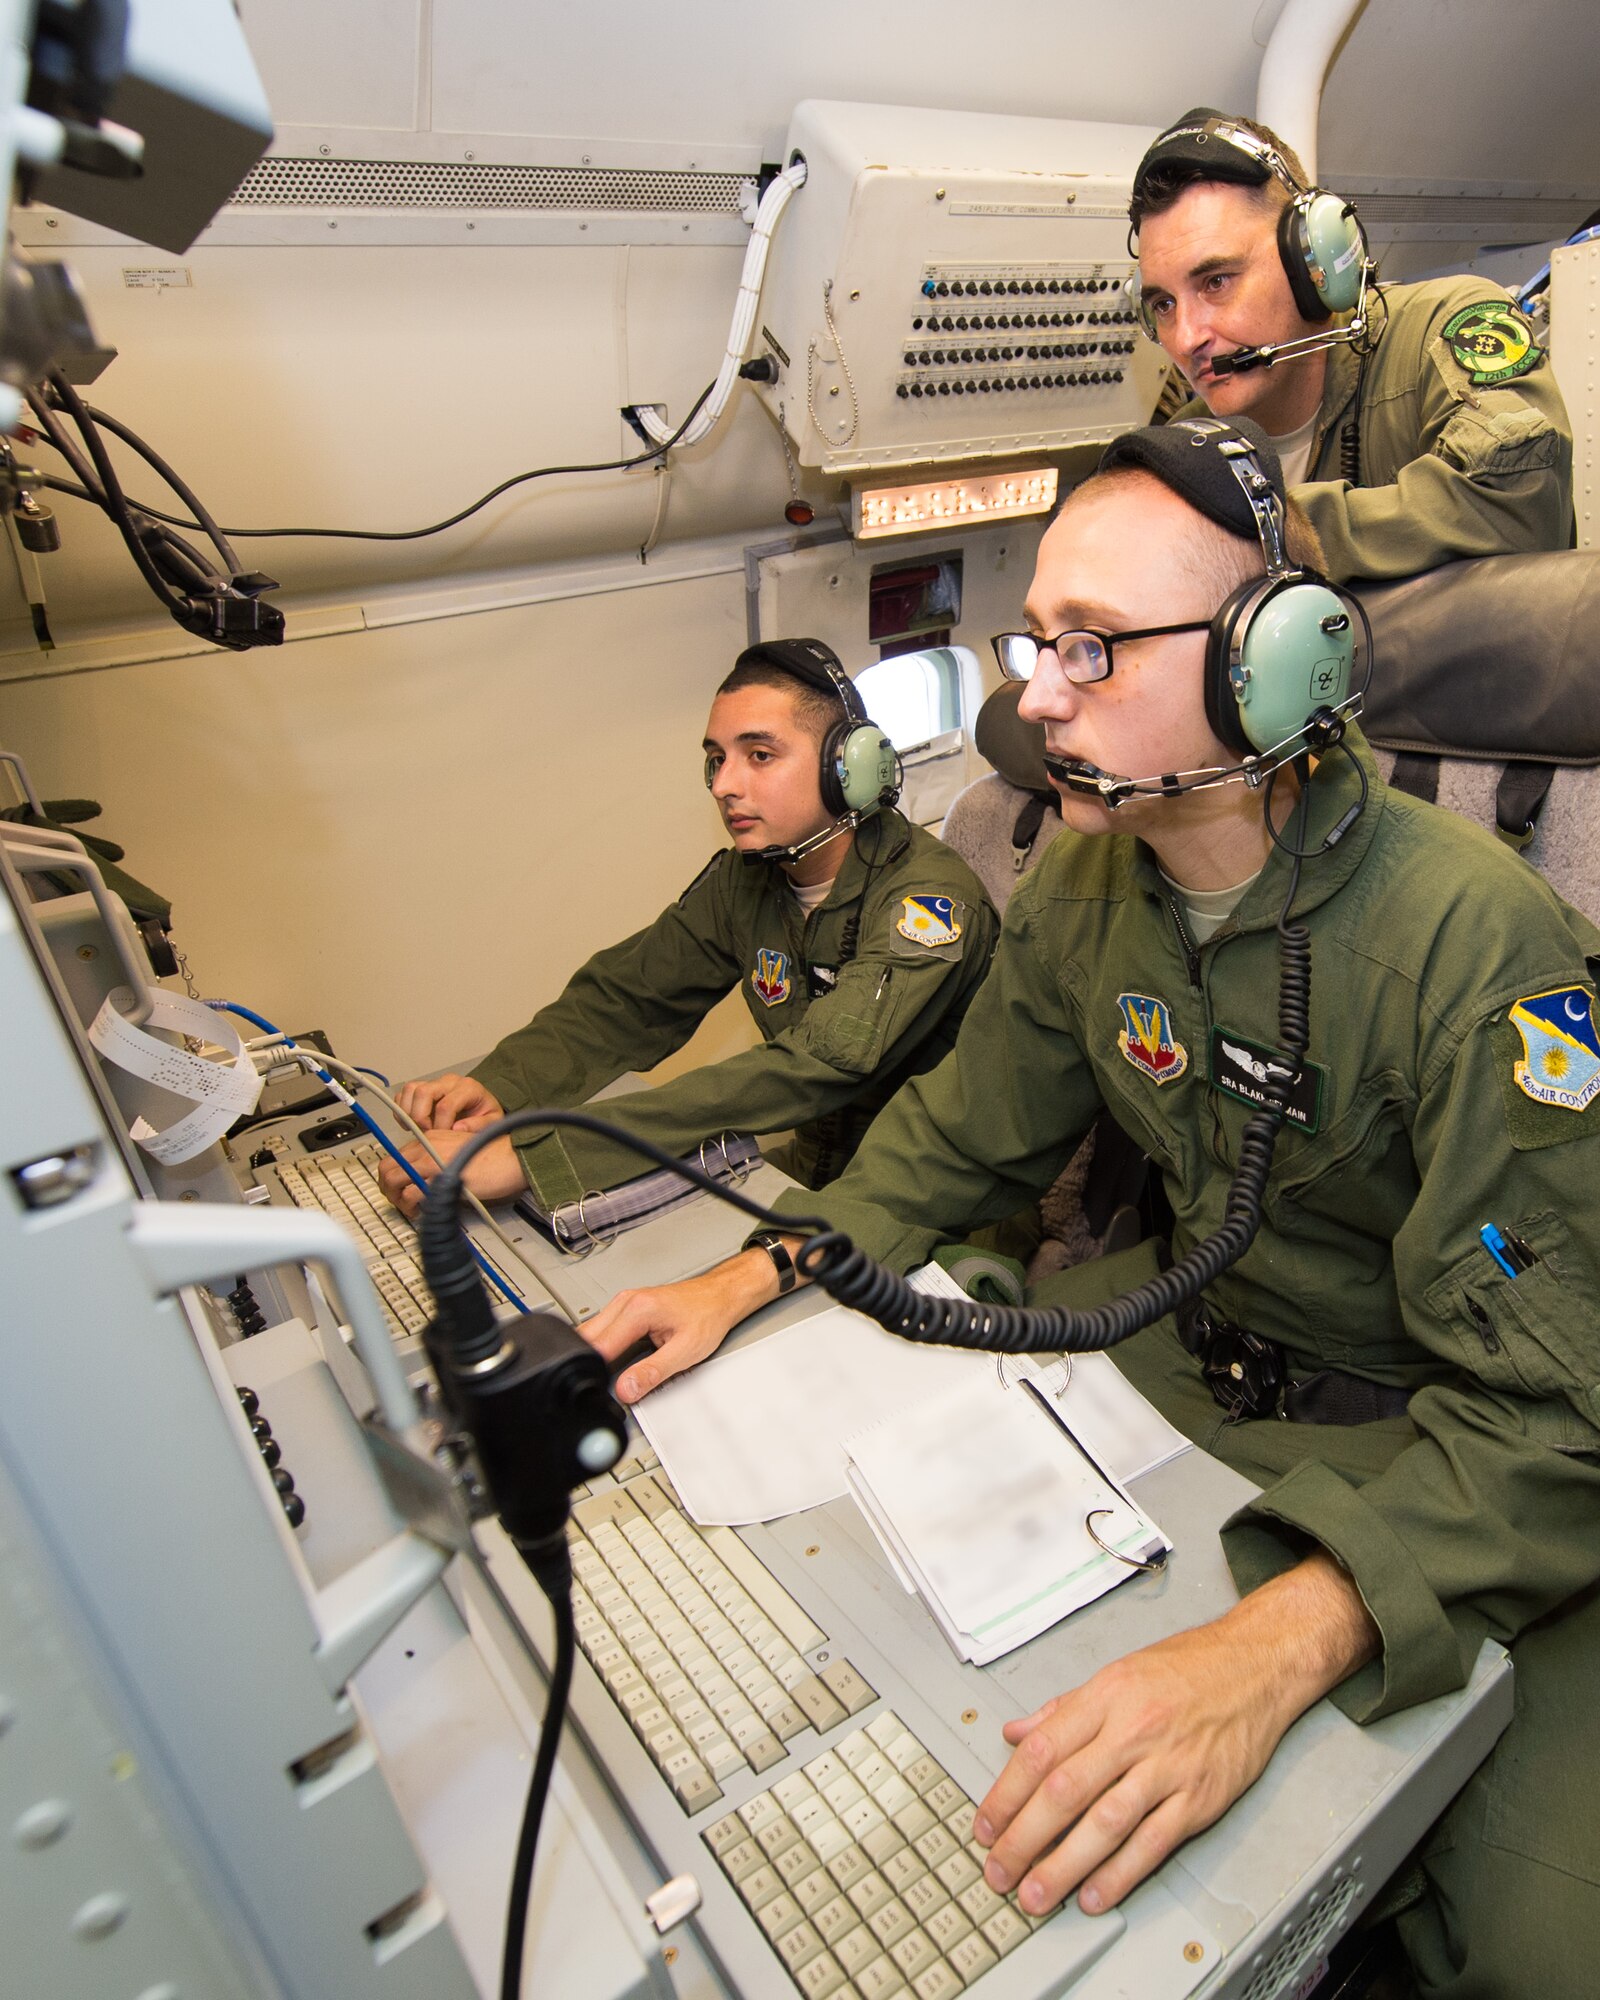 U.S. Airmen with the 12th Airborne Command and Control Squadron, perform pre-flight ops checks on an E-8C Joint STARS in preparation for a mission during the Northern Strike 2015 combat exercise, Robins Air Force Base, Ga., July 29, 2015. Team JSTARS joined military forces from more than 20 states and four coalition countries for the exercise hosted by the Michigan National Guard. Working with a liaison officer from the 116th Air Control Wing (ACW), Georgia Air National Guard, deployed to the exercise headquarters in Michigan, aircrews flying out of Robins Air Force Base from the 461st ACW and the Army JSTARS provided real-time tracking information to air and ground forces helping them to find and identify enemy forces played by exercise participants. (U.S. Air National Guard photo by Senior Master Sgt. Roger Parsons/Released) (Portions of the photo have been blurred for security purposes)